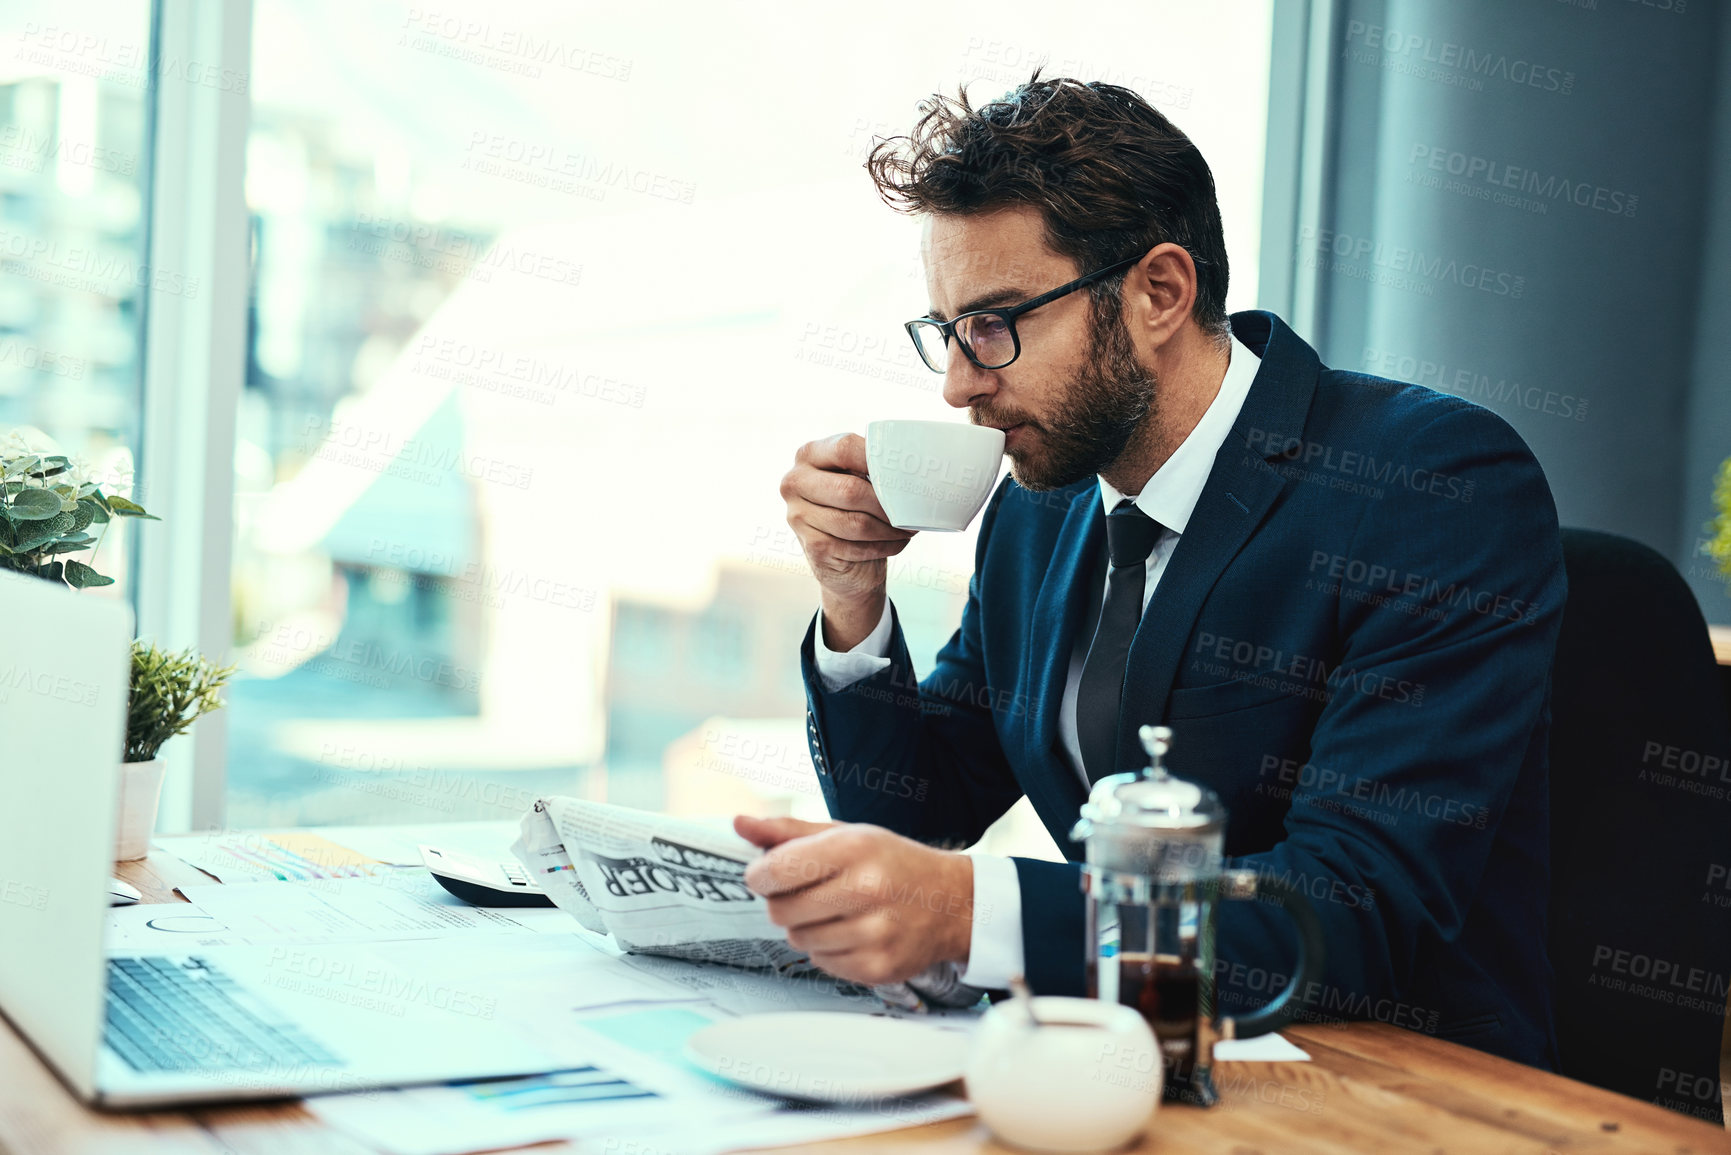 Buy stock photo Shot of a young businessman drinking a cup of tea while reading a newspaper in an office